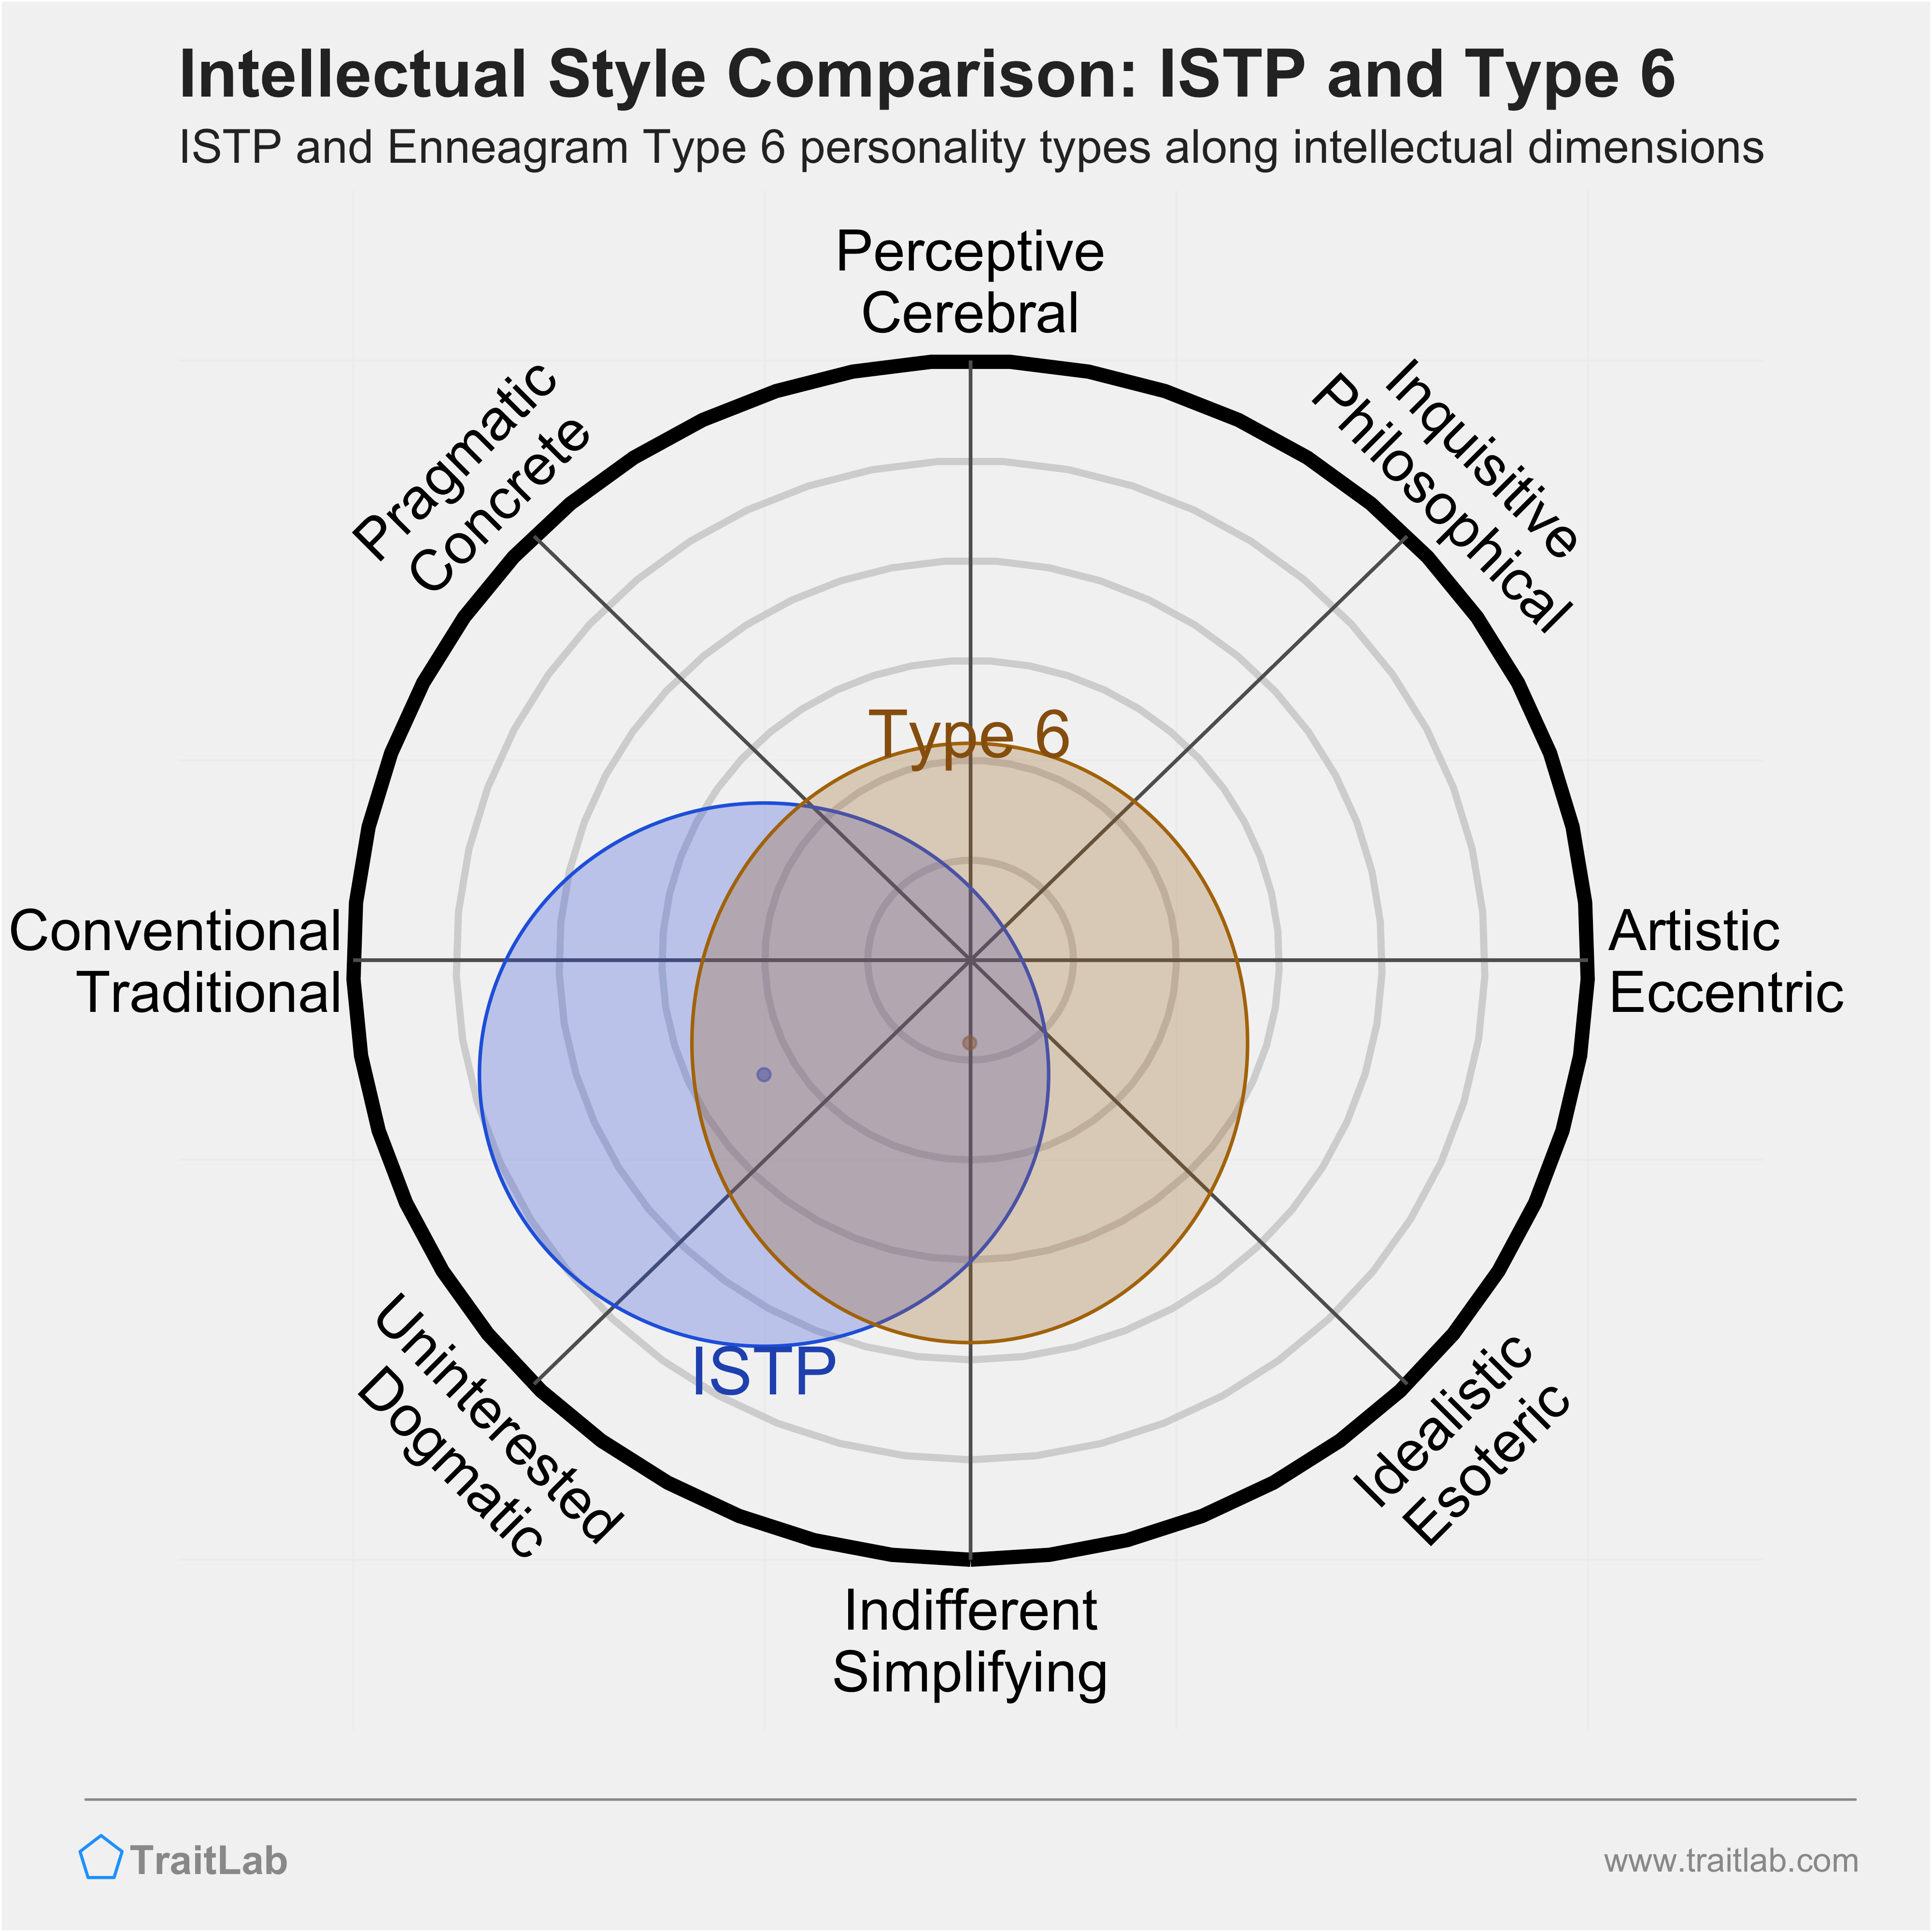 ISTP and Type 6 comparison across intellectual dimensions